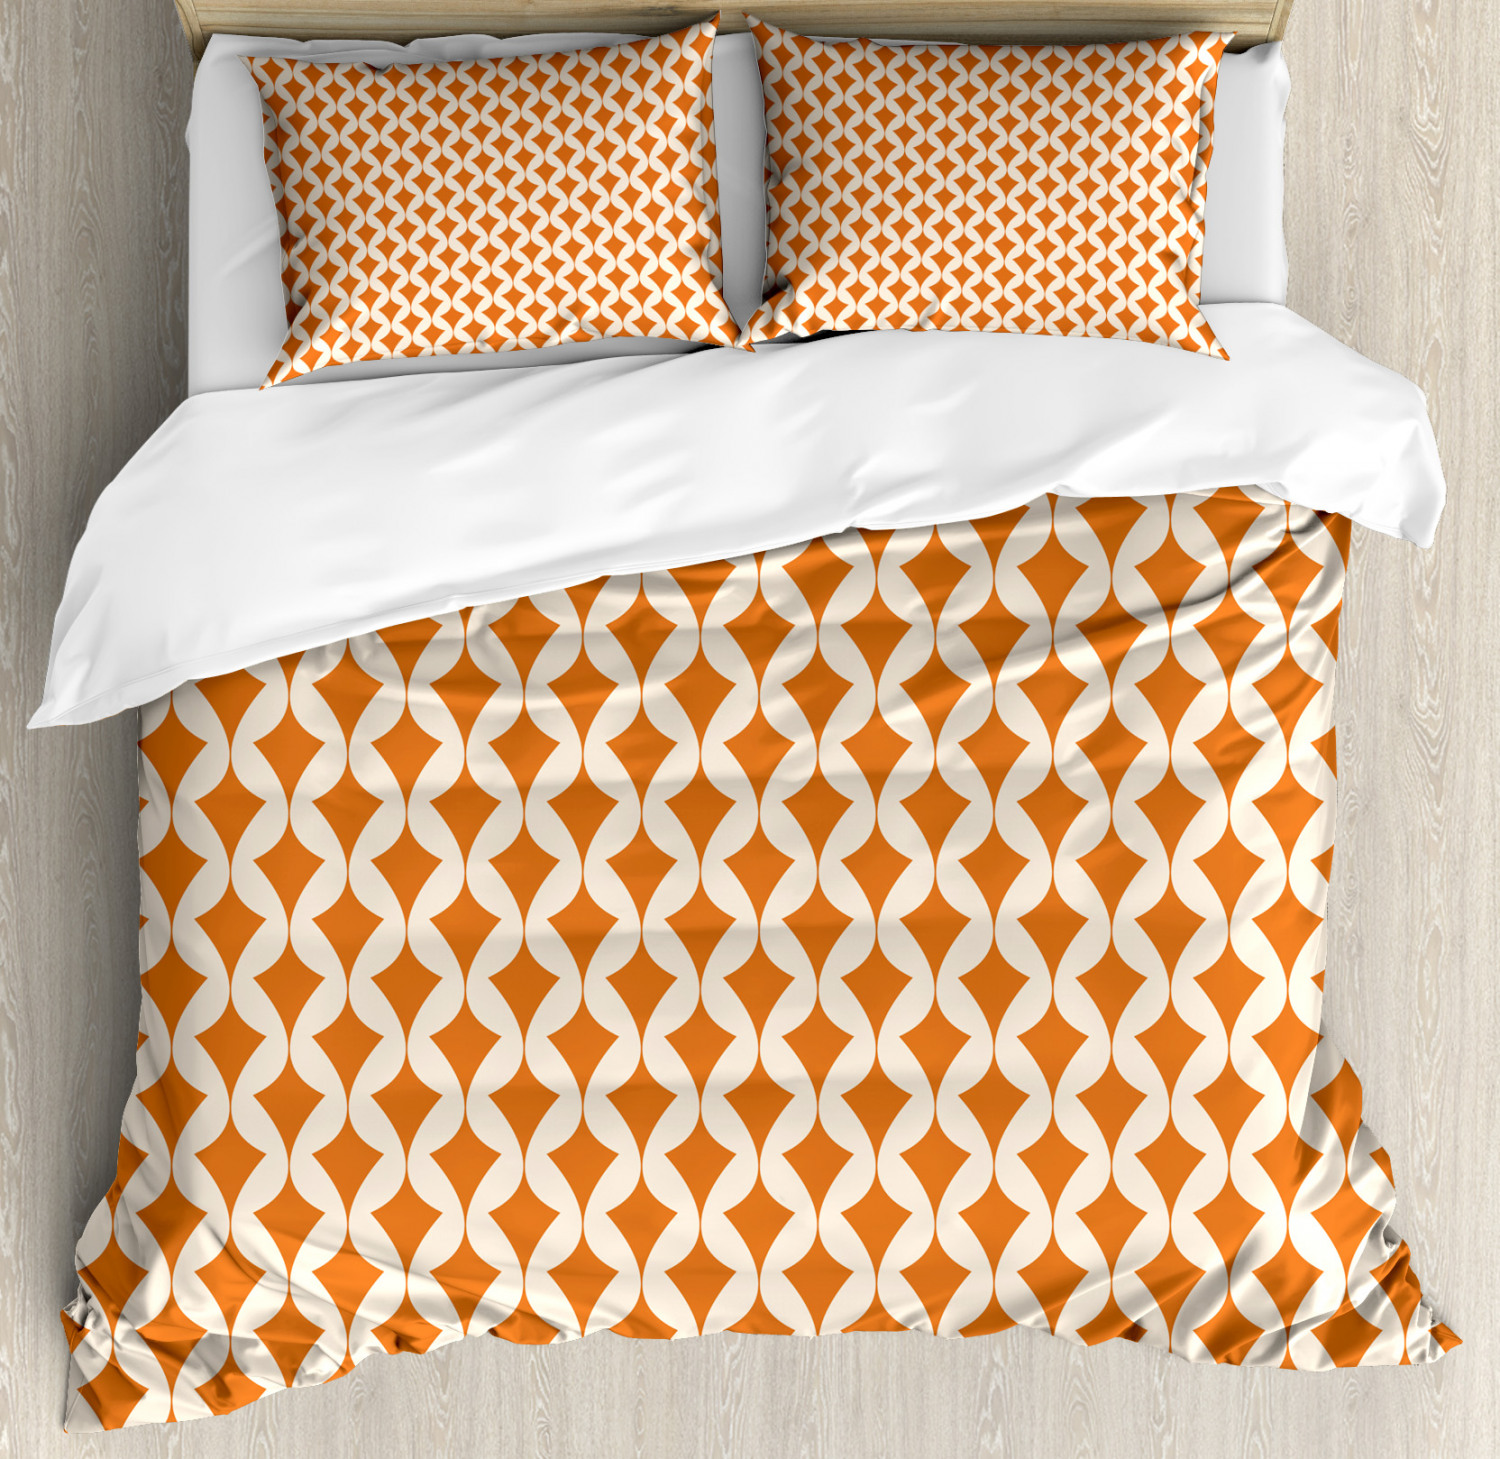 Orange Duvet Cover Set Twin Queen King Sizes With Pillow Shams